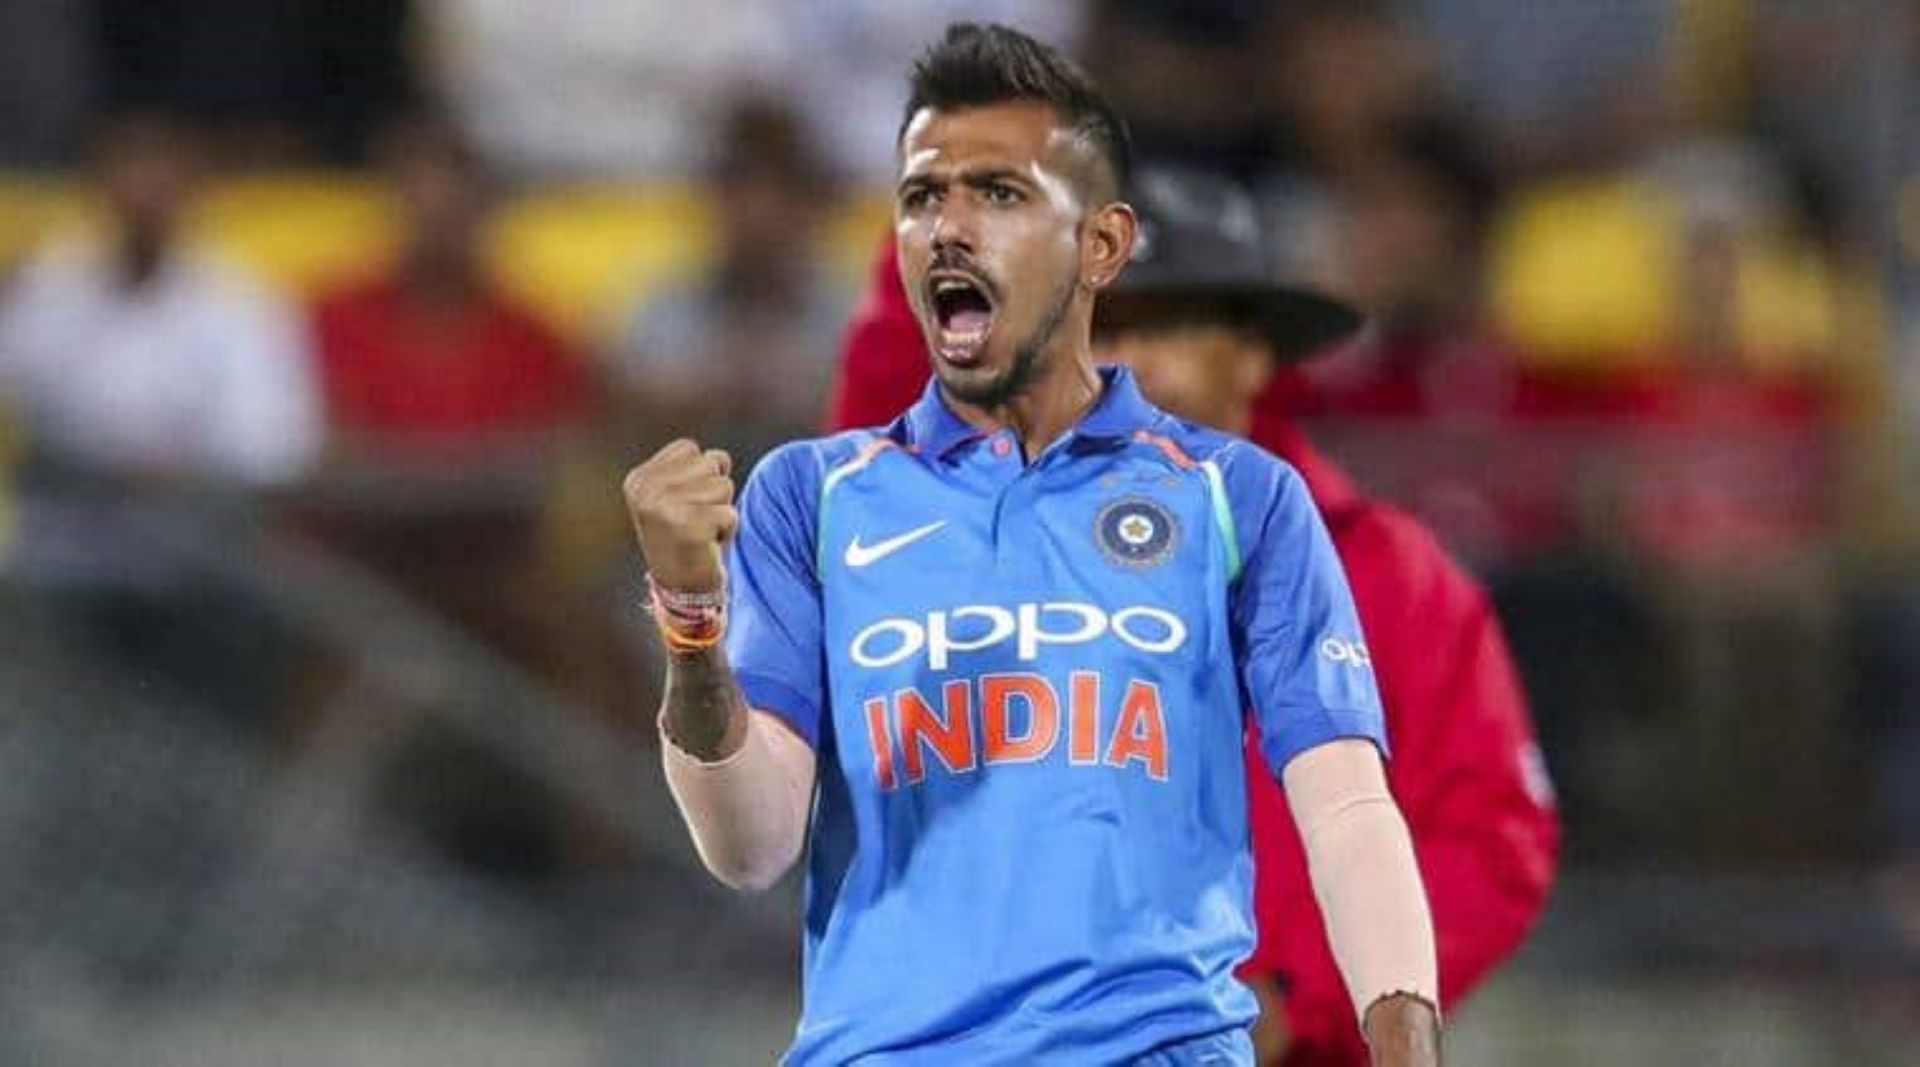 Chahal has been among the best Indian spinners over the last half-decade.